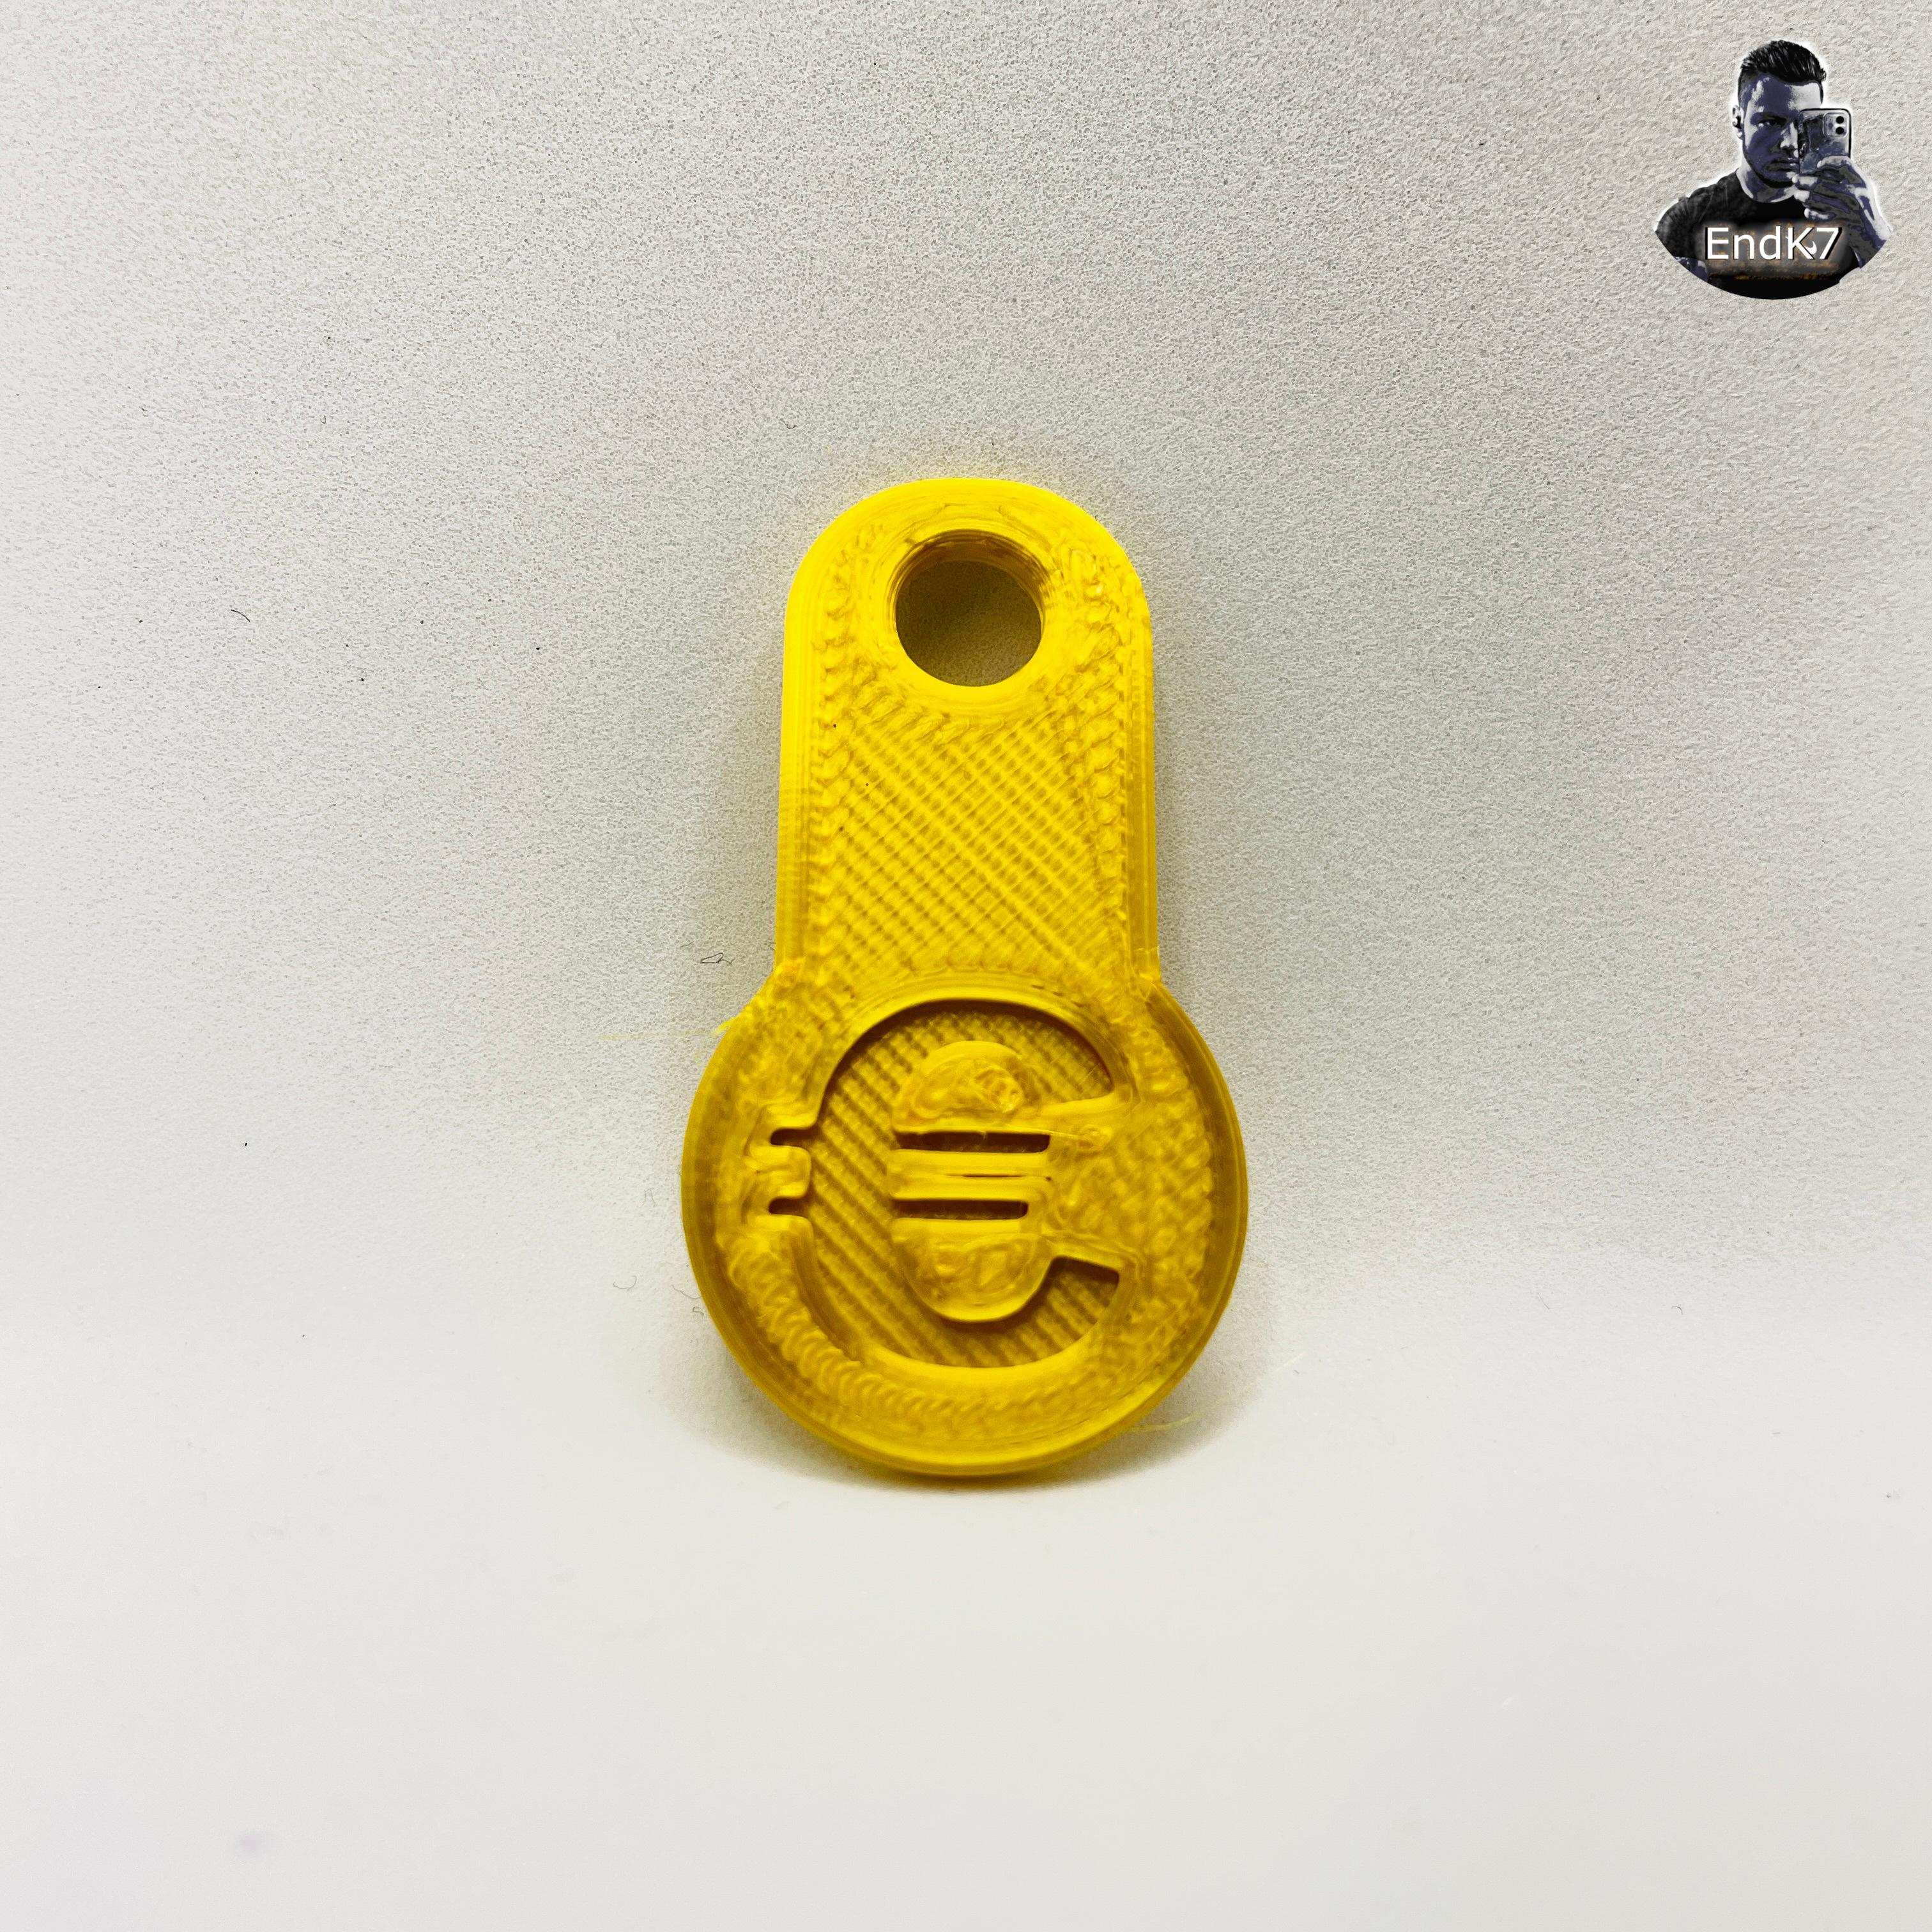 Shopping Card Chip Keychain - Shopping Token Coin - 10 Variations 3d model